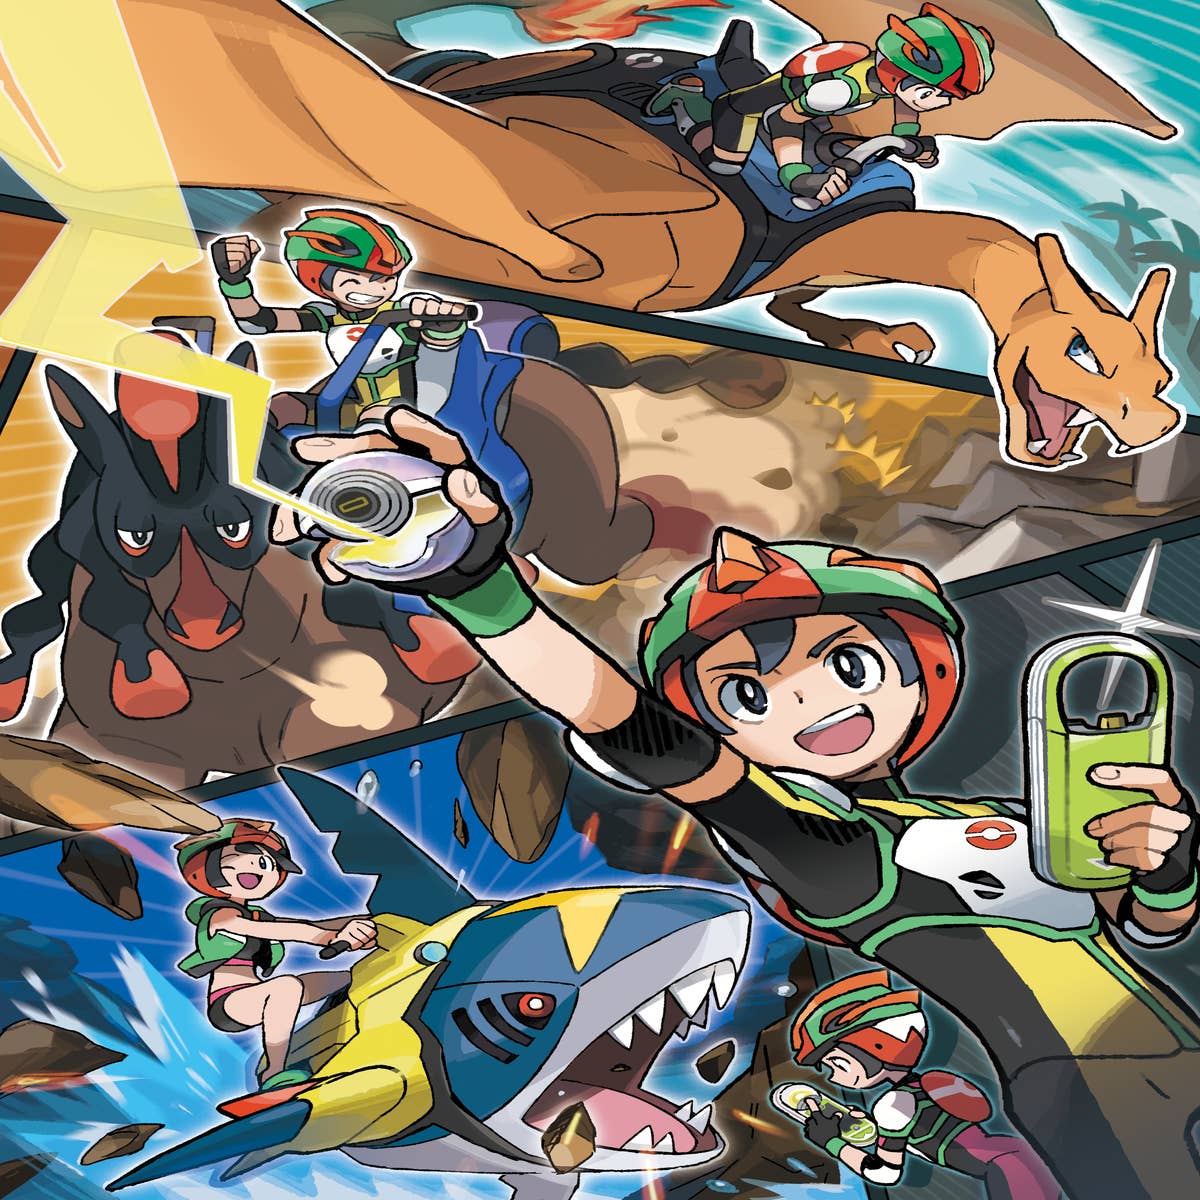 Pokemon Sun and Pokemon Moon review: Living on island time